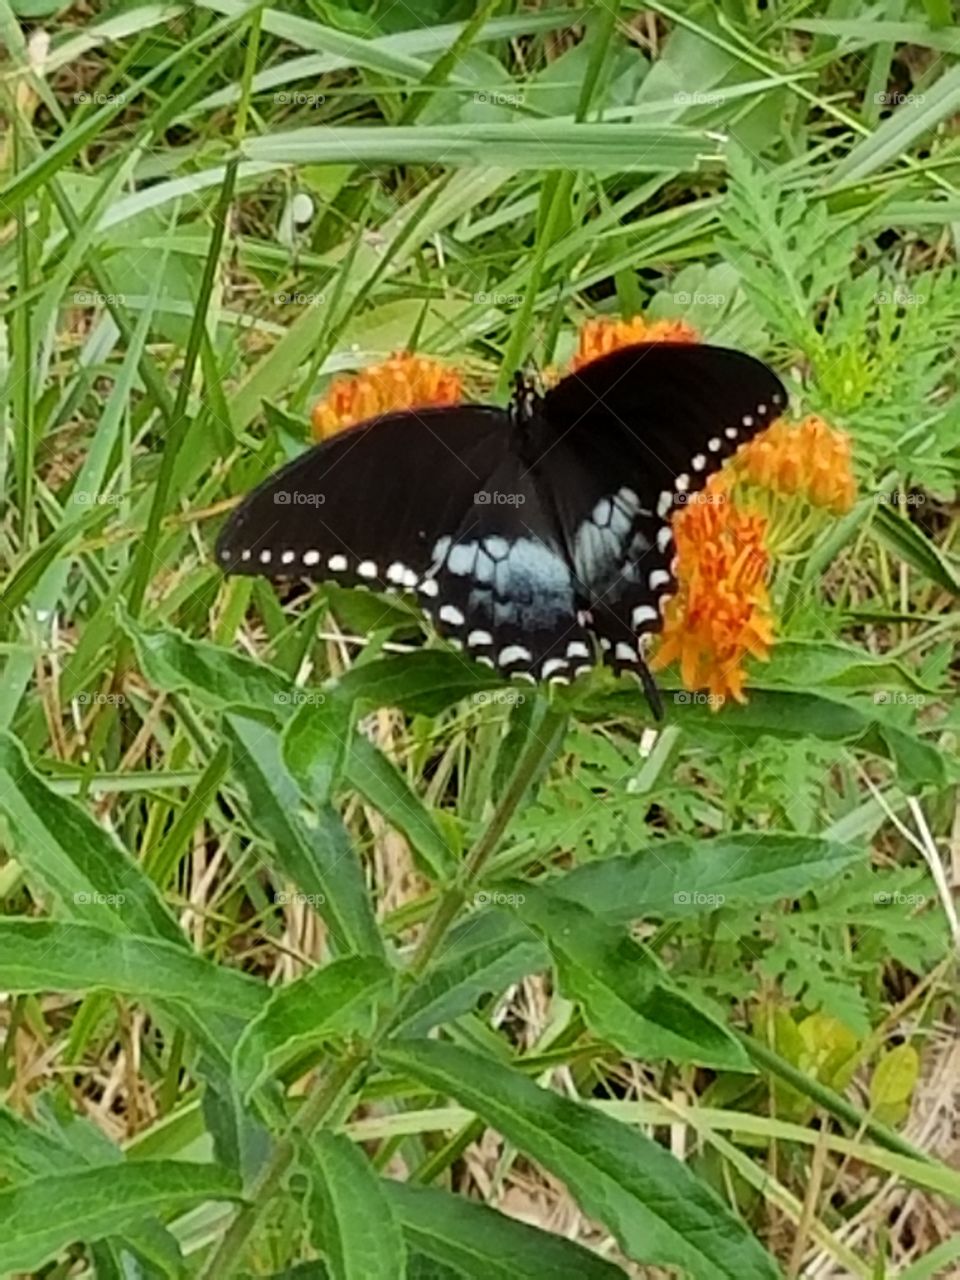 Blue swallow tail butterfly